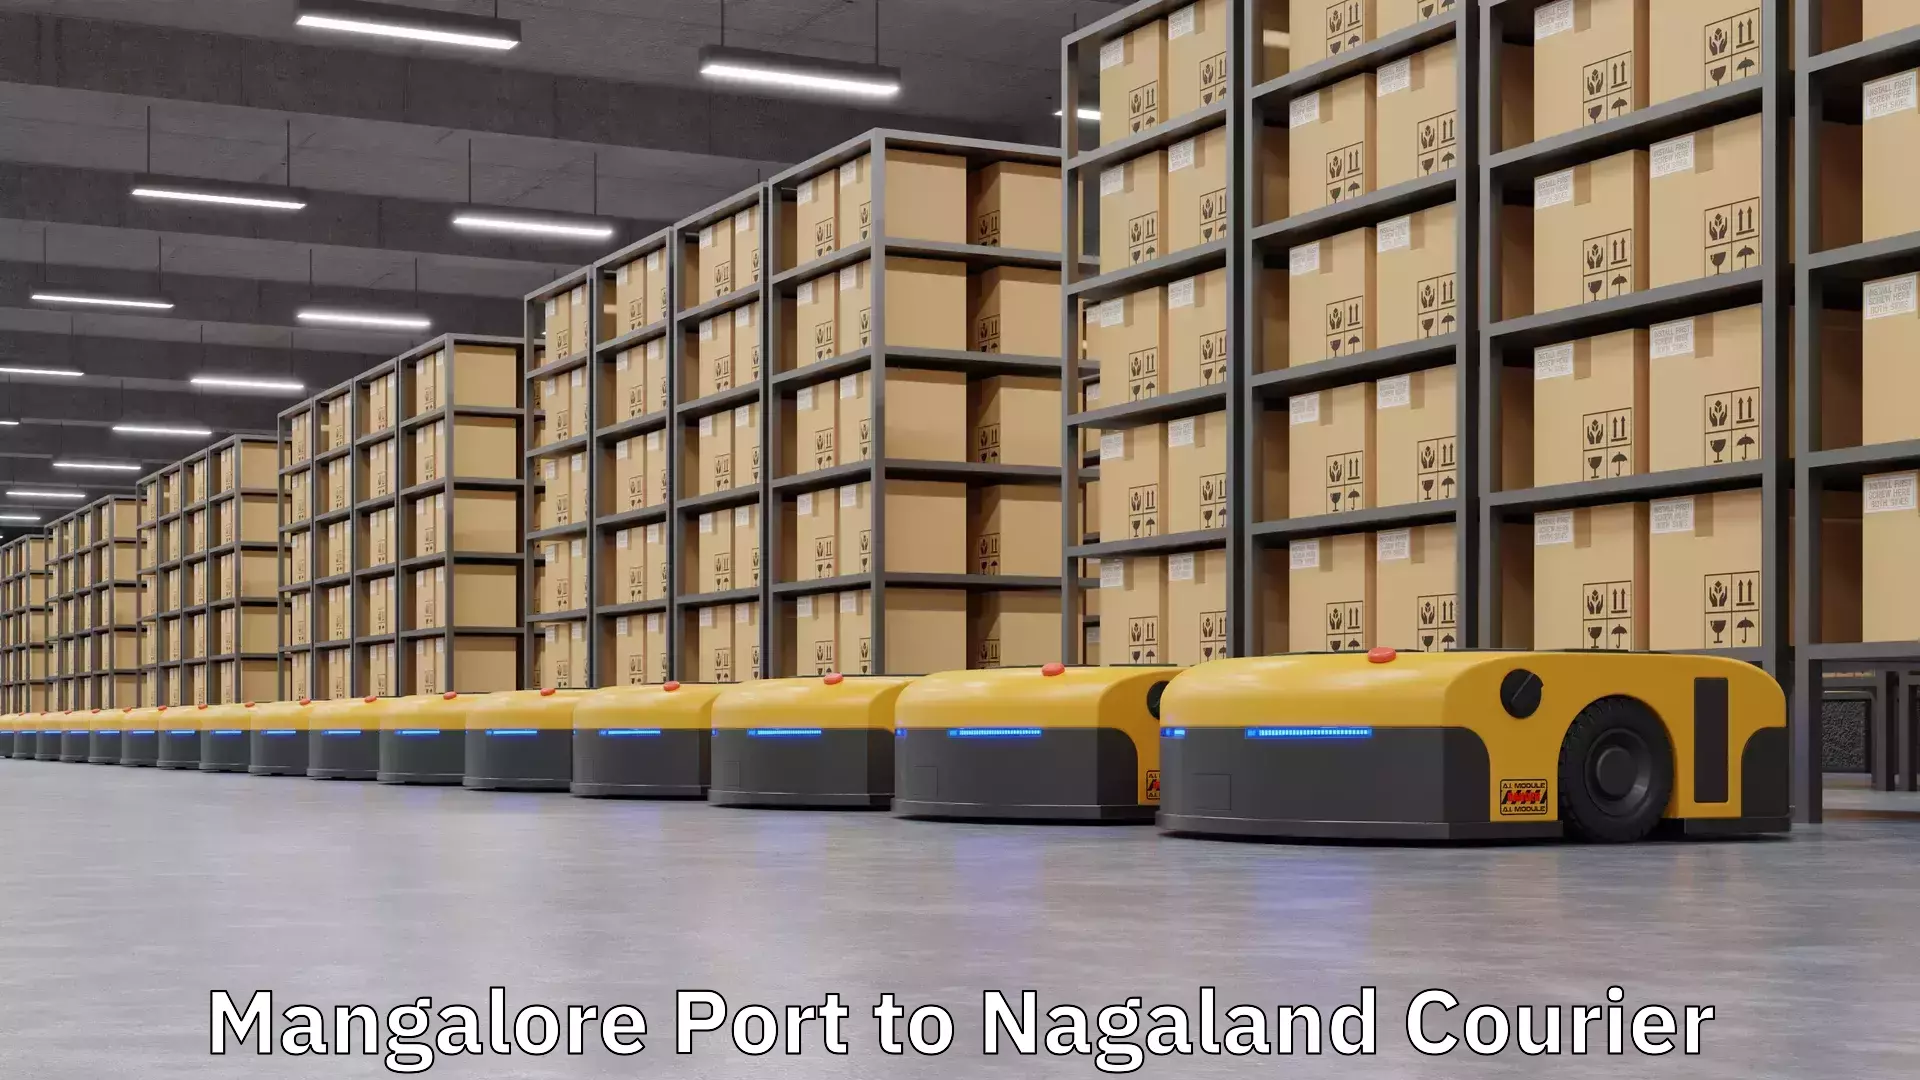 Speedy delivery service Mangalore Port to Nagaland